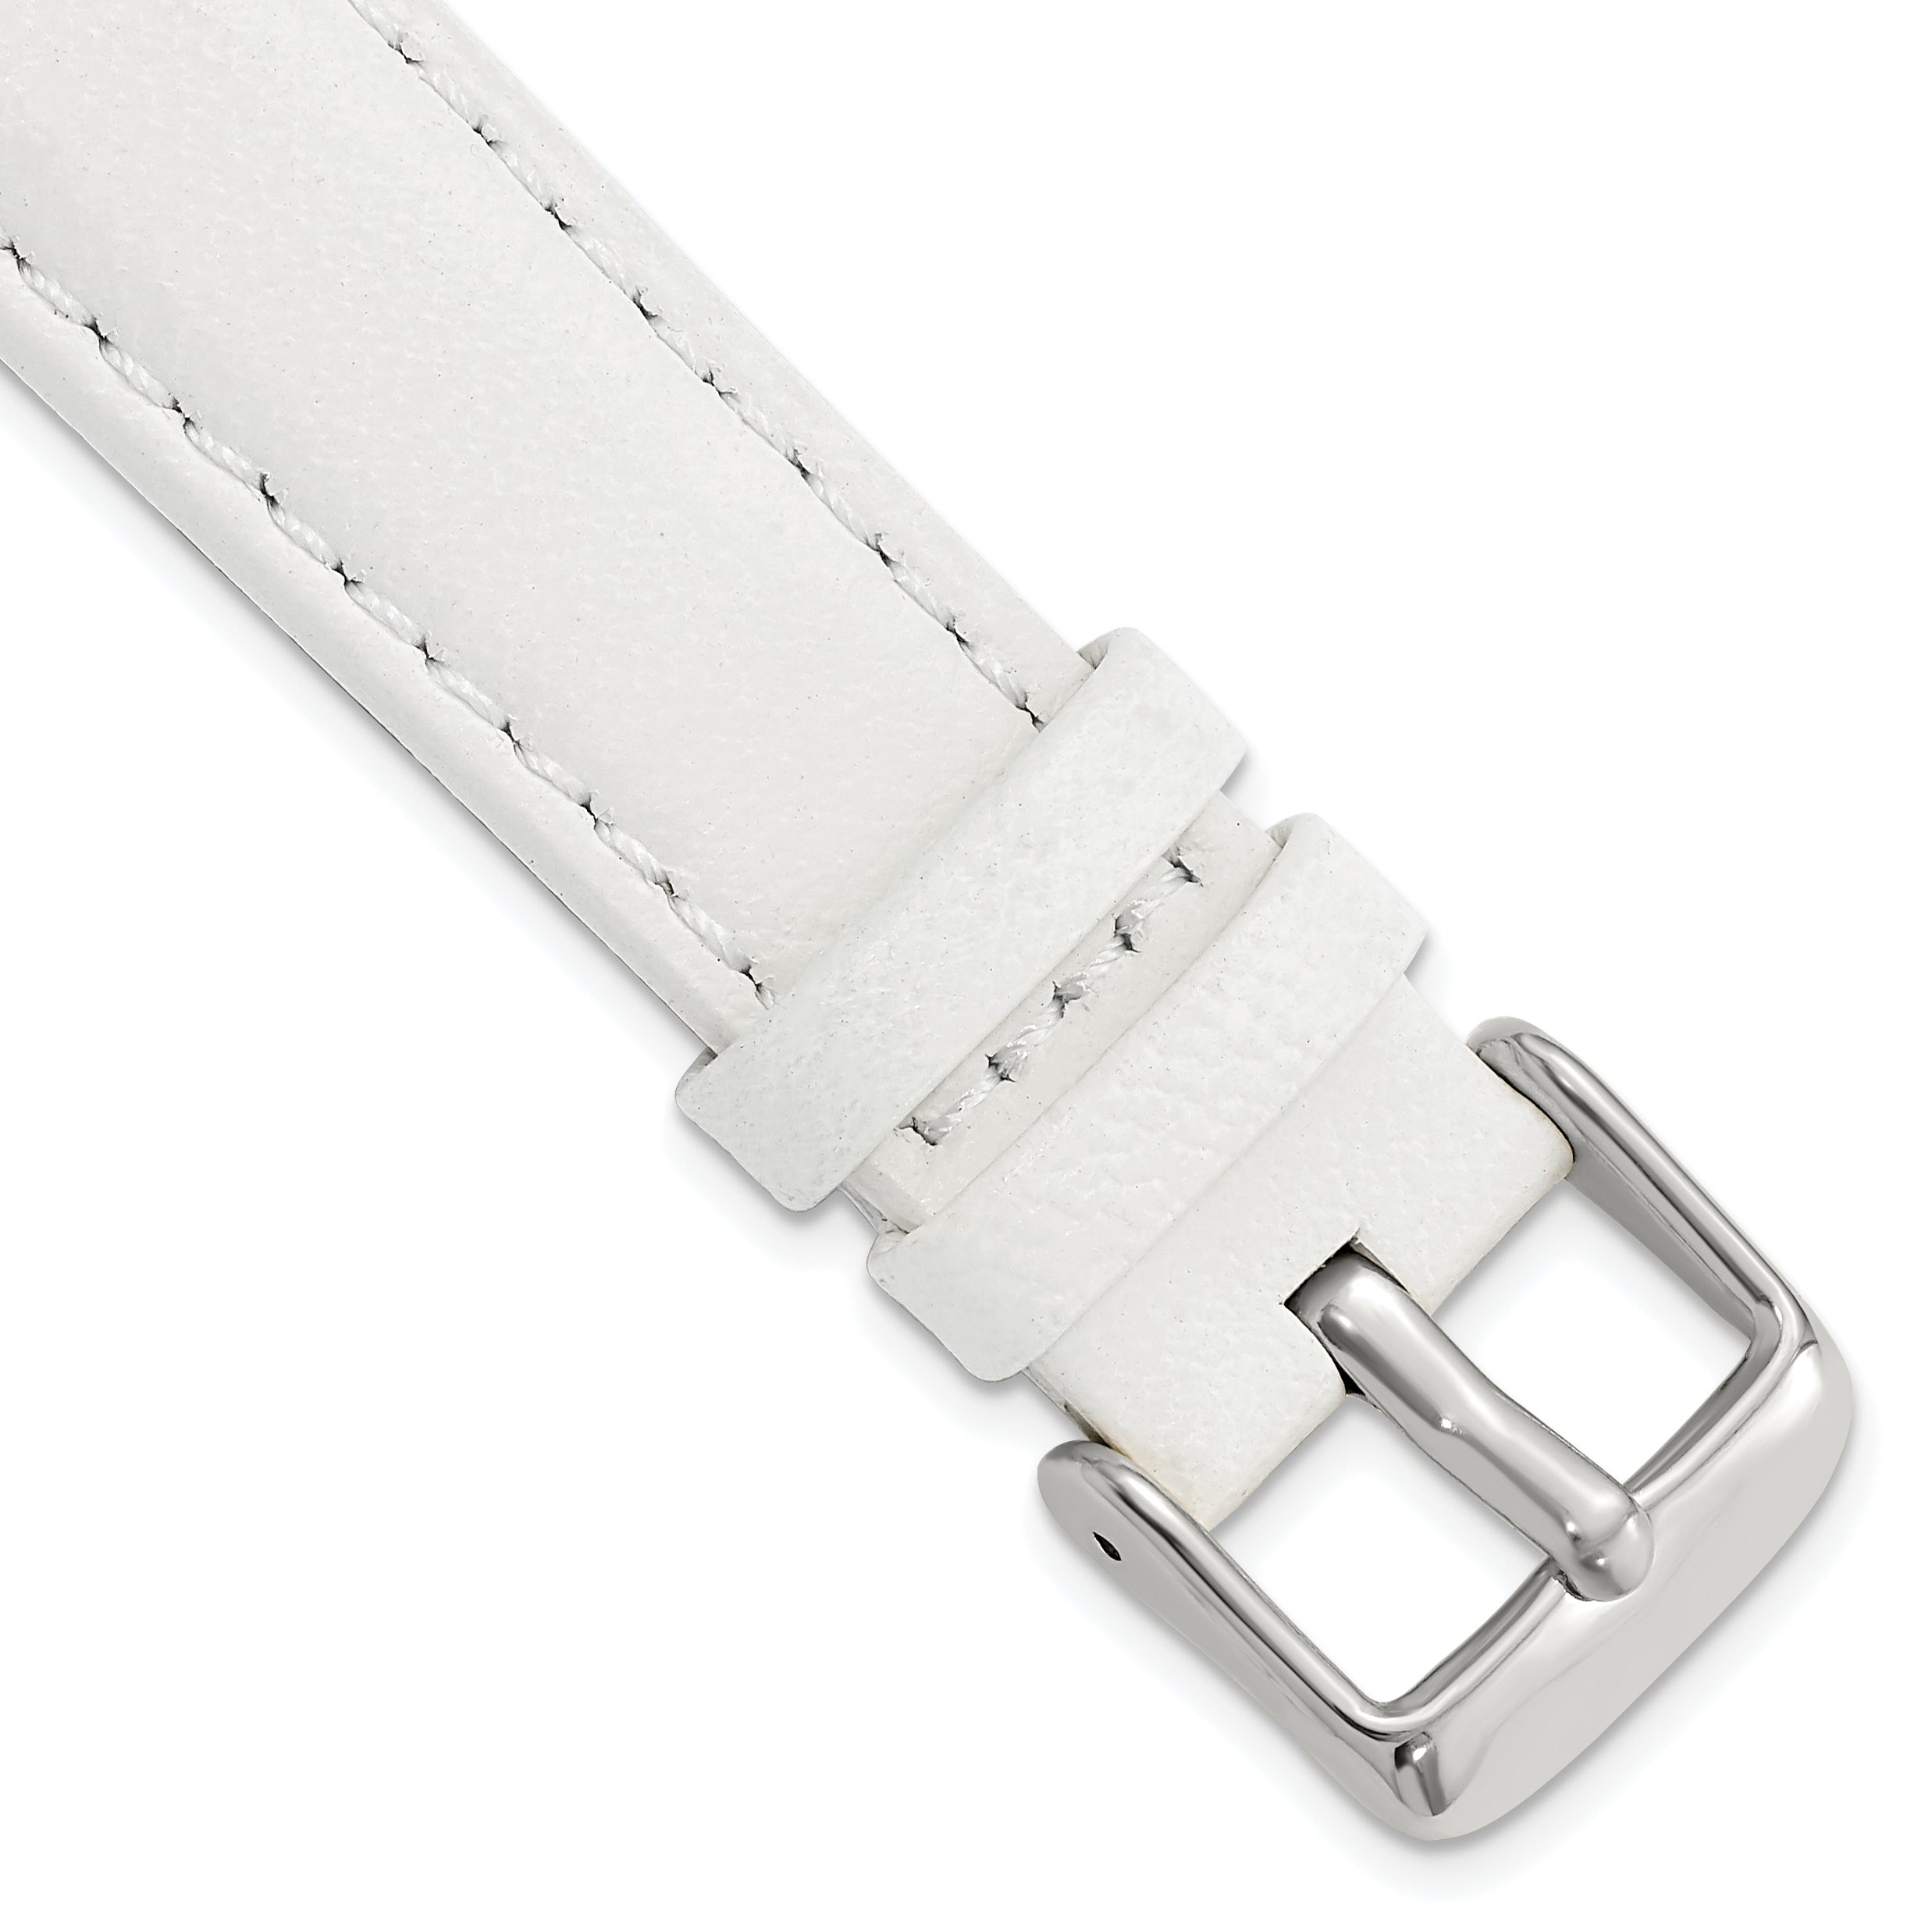 DeBeer 18mm White Glove Leather with Silver-tone Panerai Style Buckle 7.75 inch Watch Band